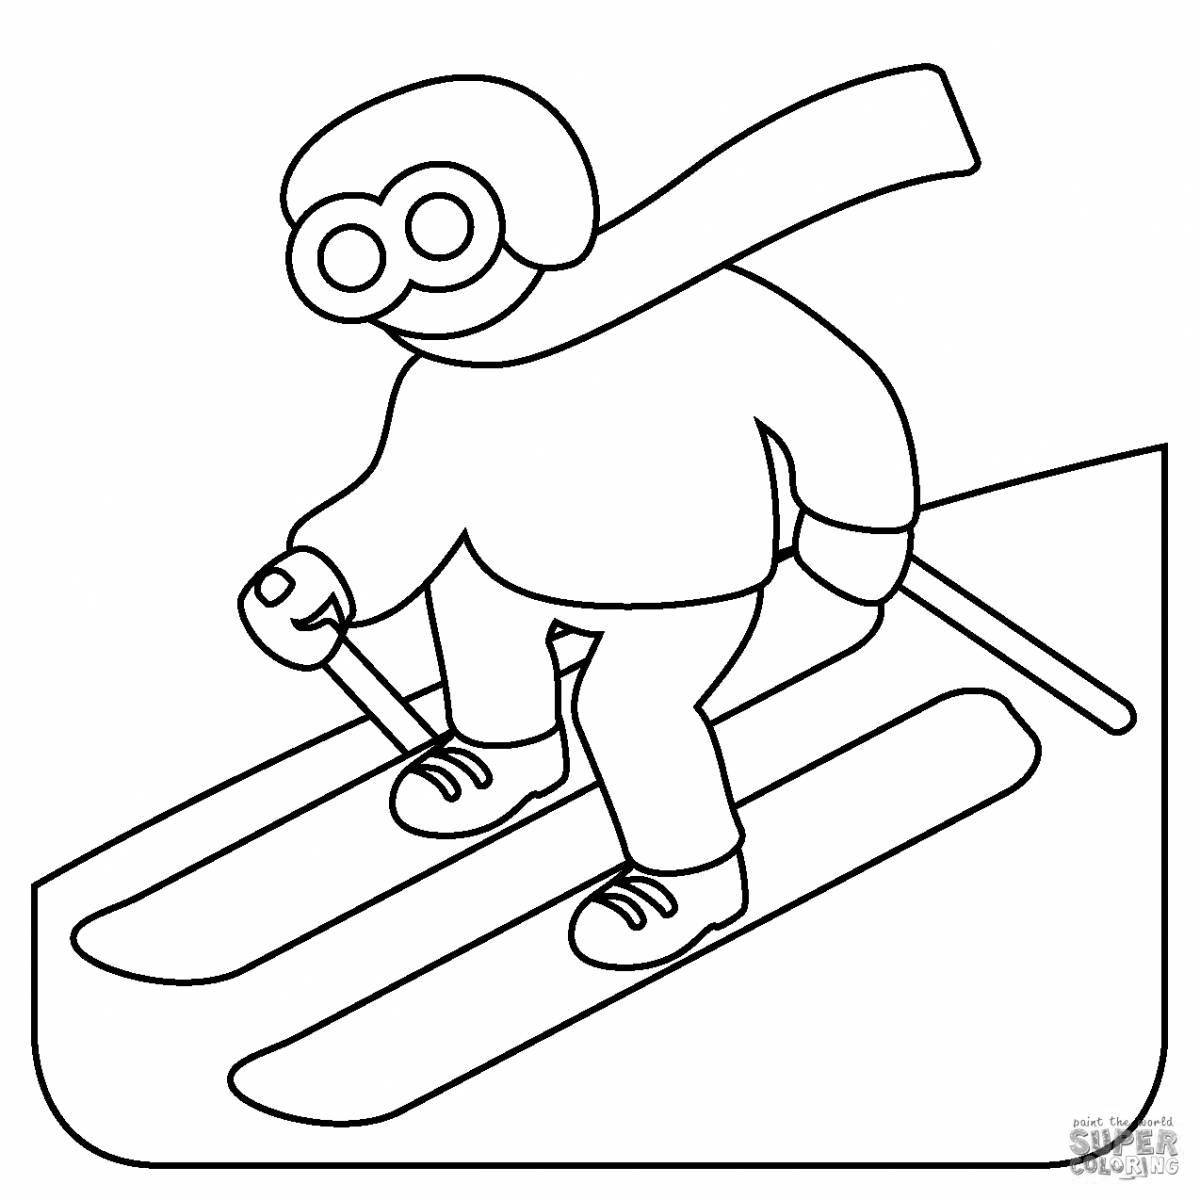 Colorful skier coloring book for children 5-6 years old